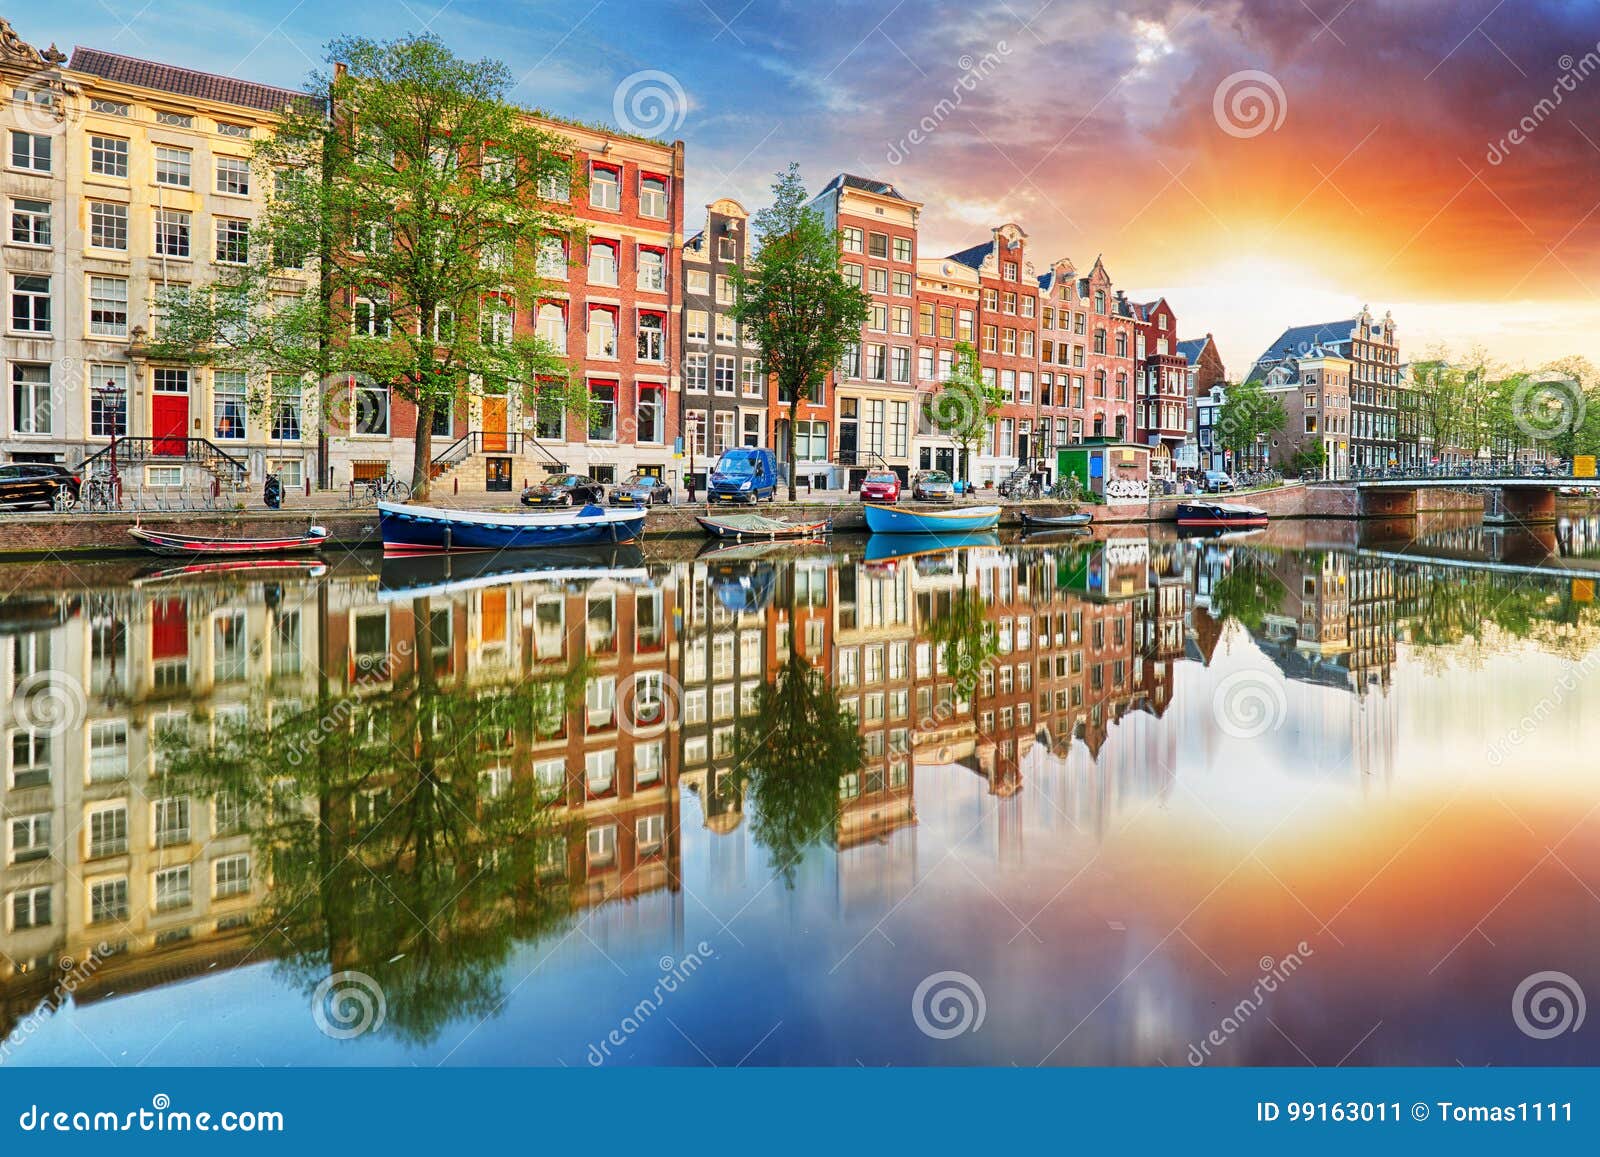 amsterdam canal houses at sunset reflections, netherlands, panorama